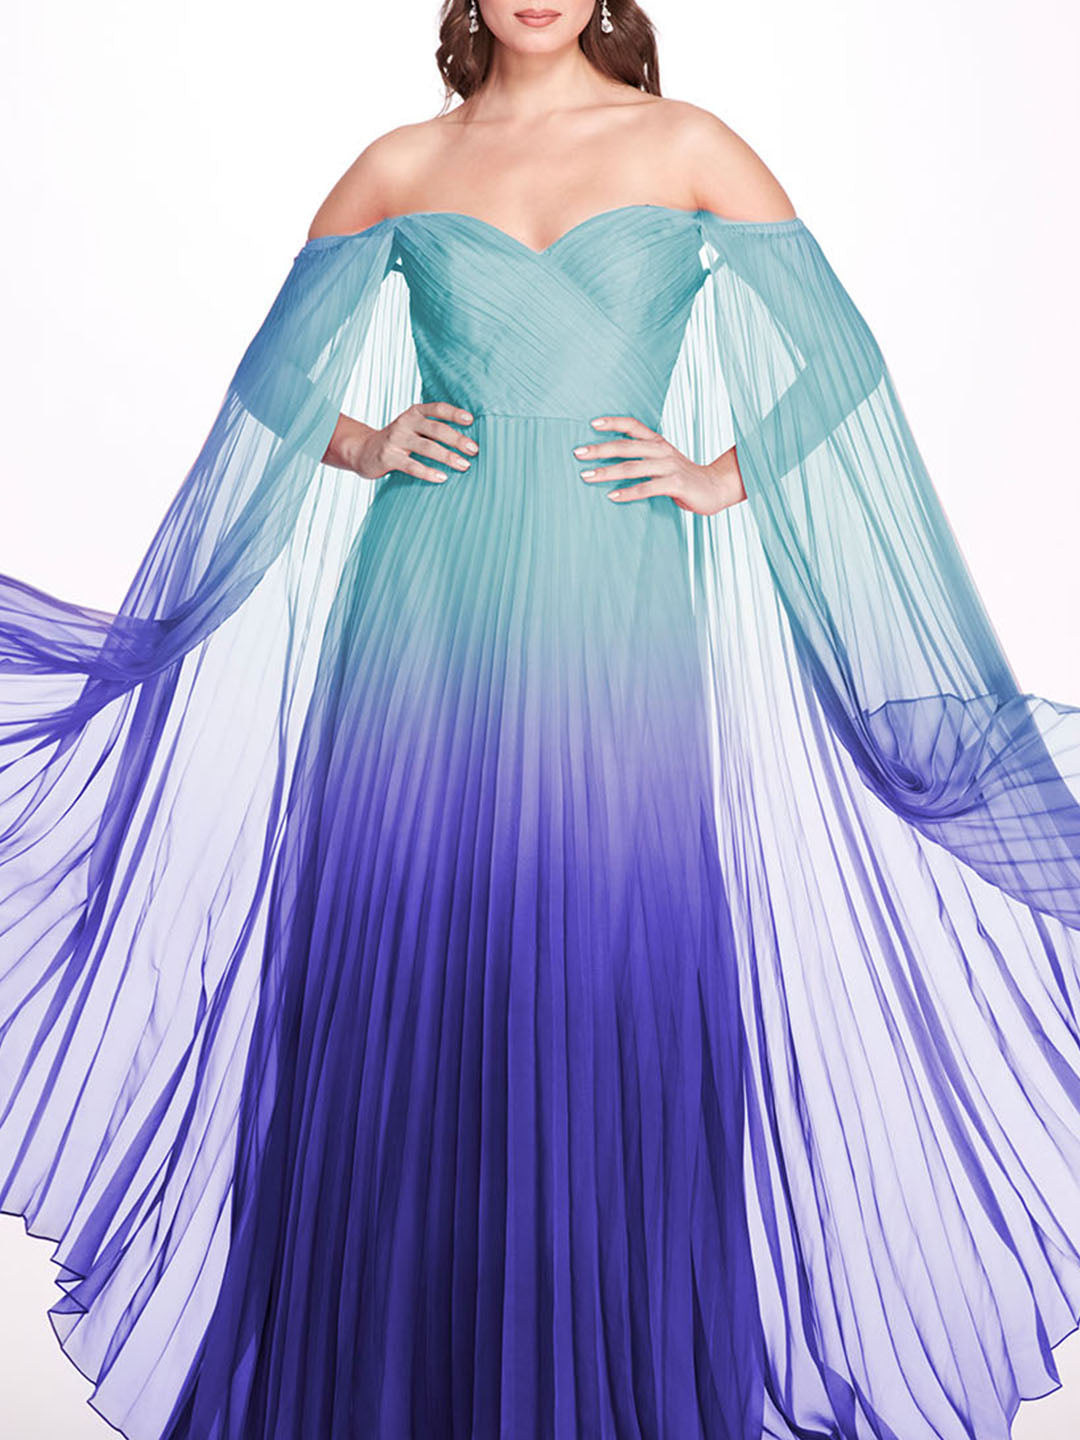 Ombre Chiffon Off Shoulder Gown | Marchesa